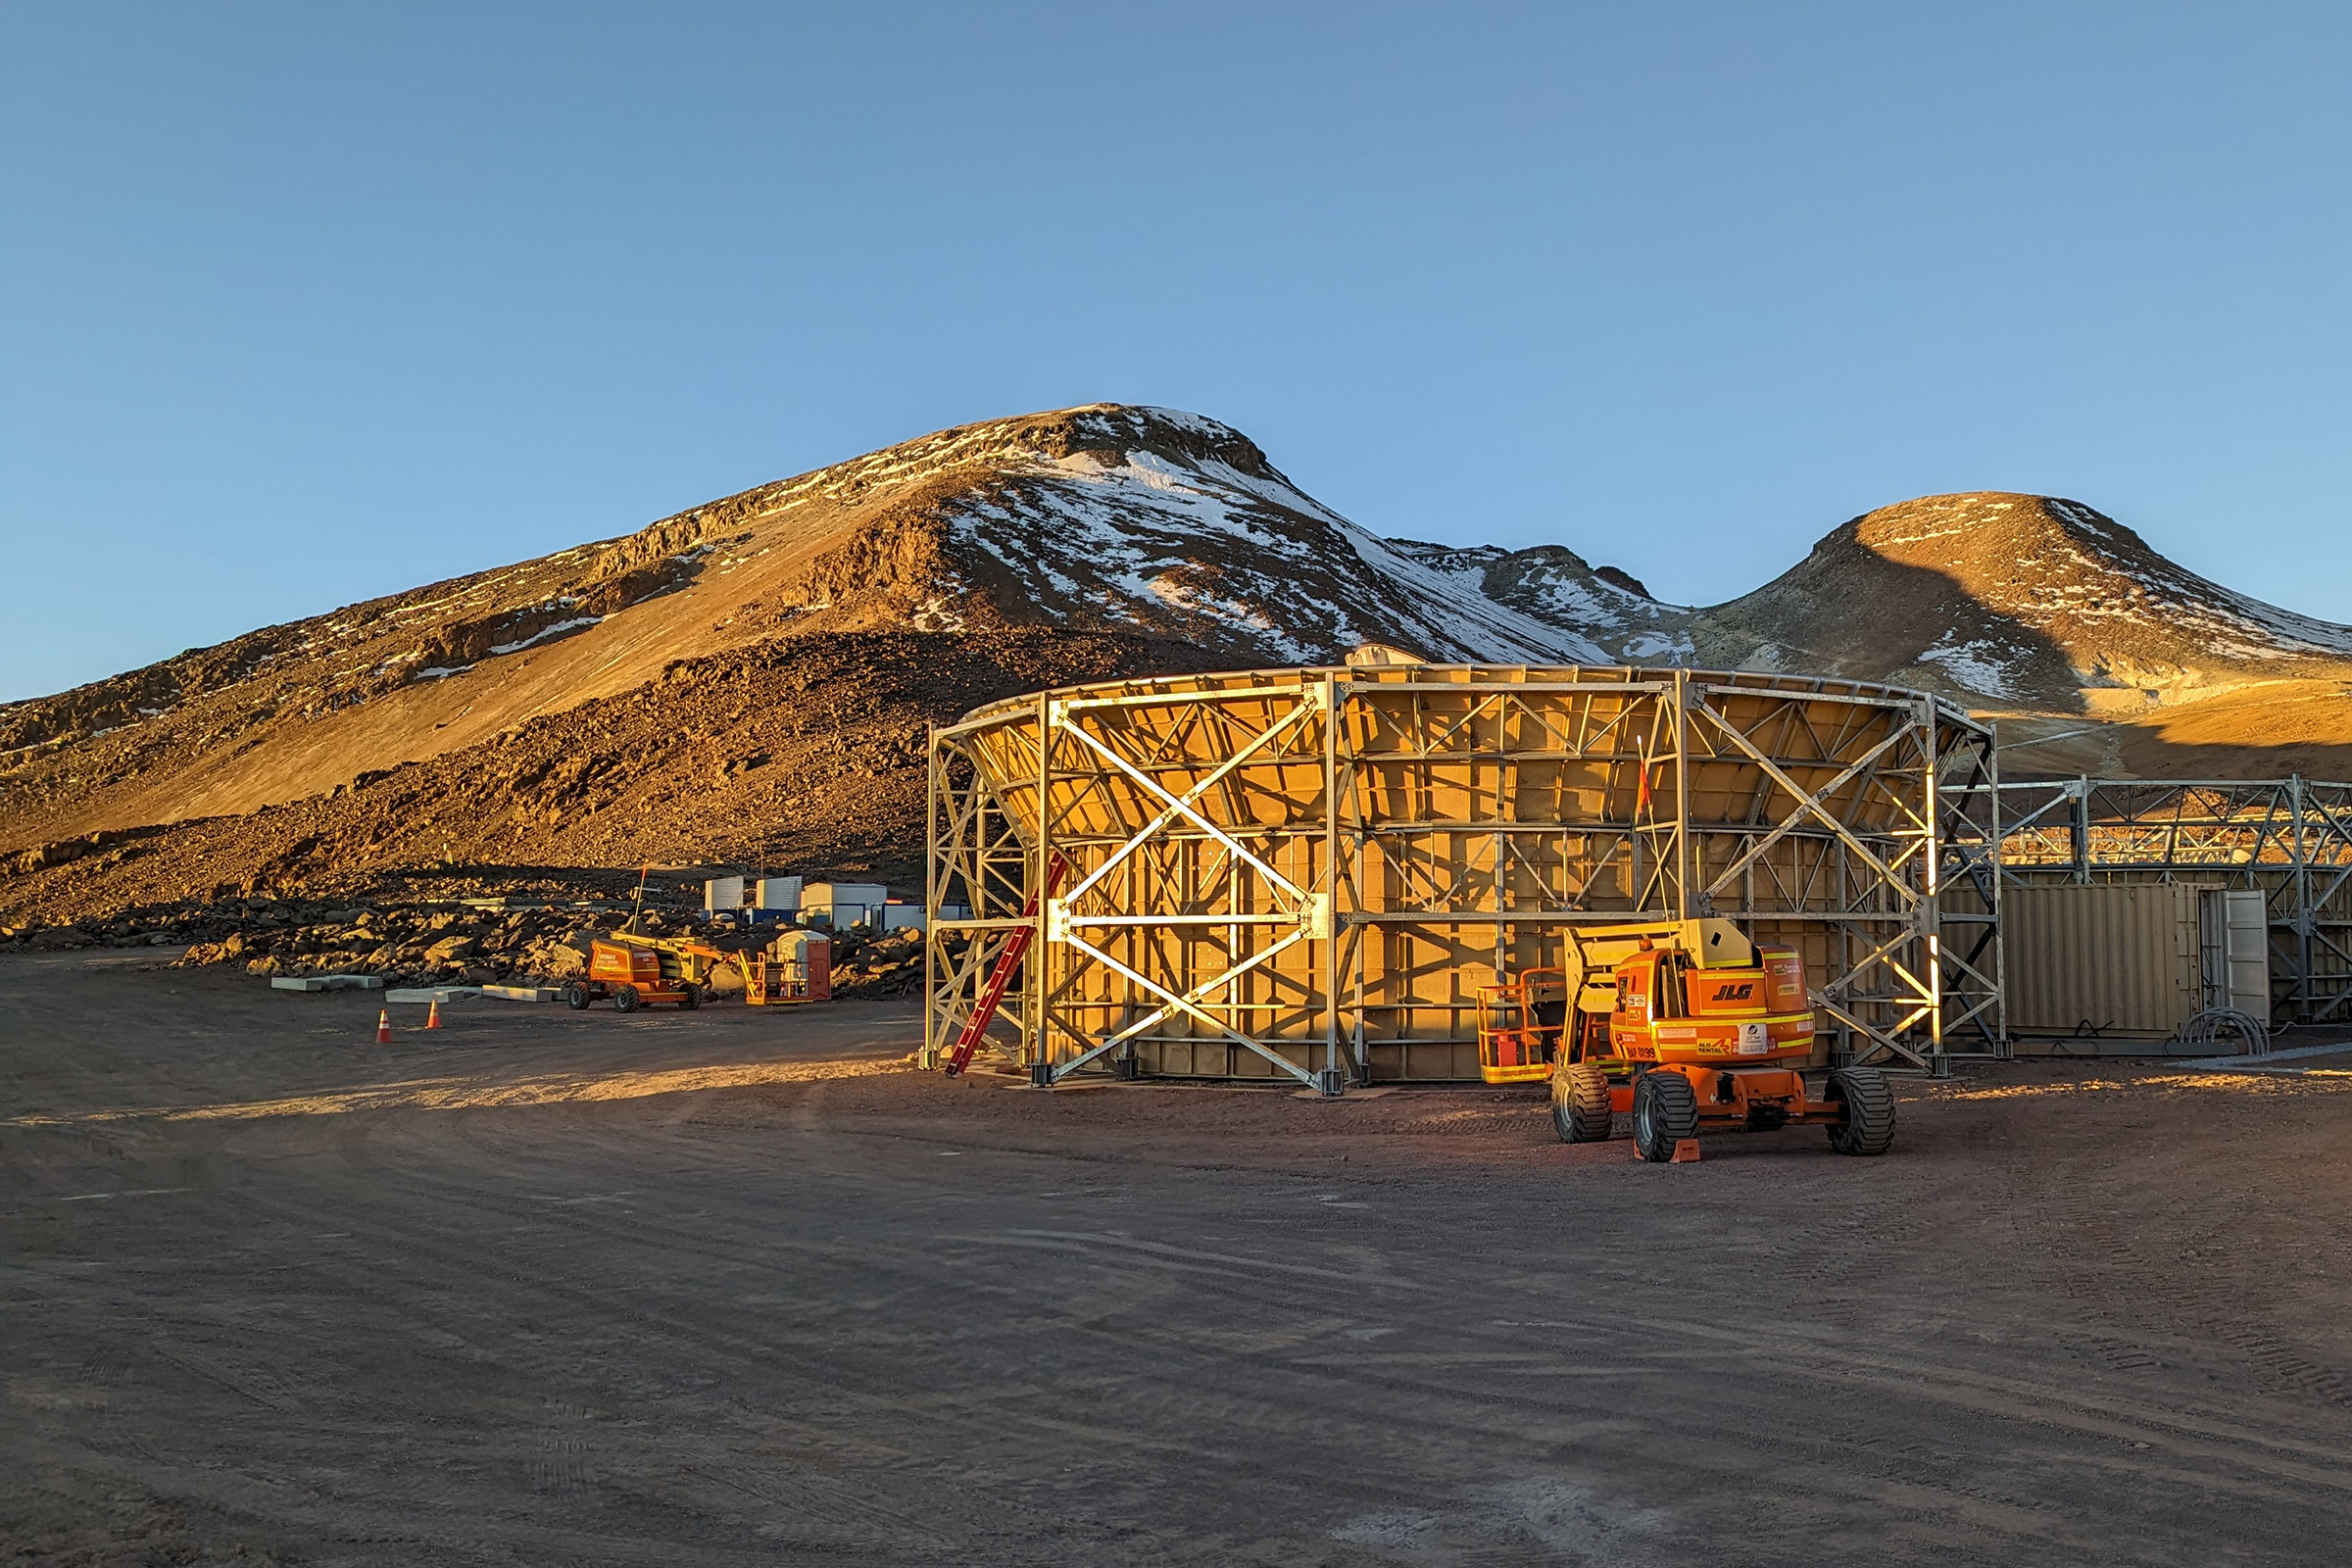 A telescope enclosure sits in front of two mountains under a blue sky